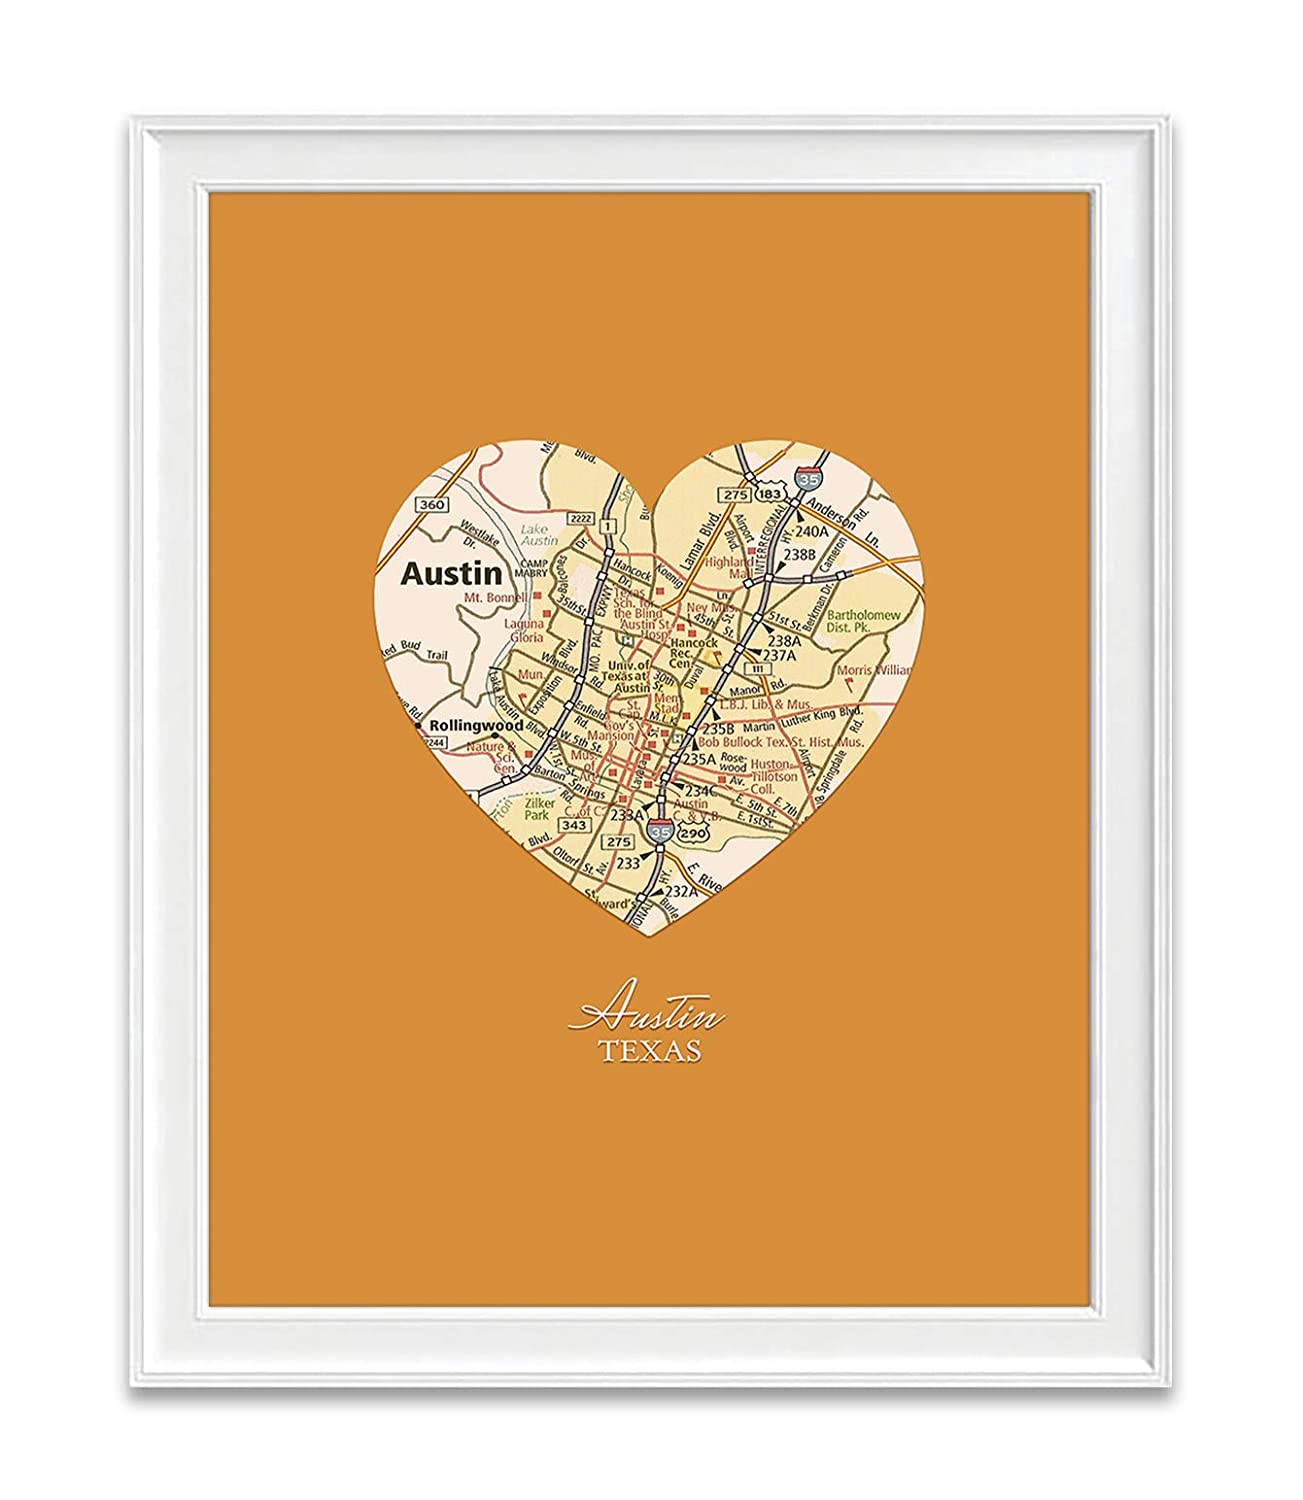 Moving to Pittsburgh Pennsylvania Map Tshirt Birthday Gifts for Men and Women Moving to Pittsburgh Pennsylvania Map Gifts